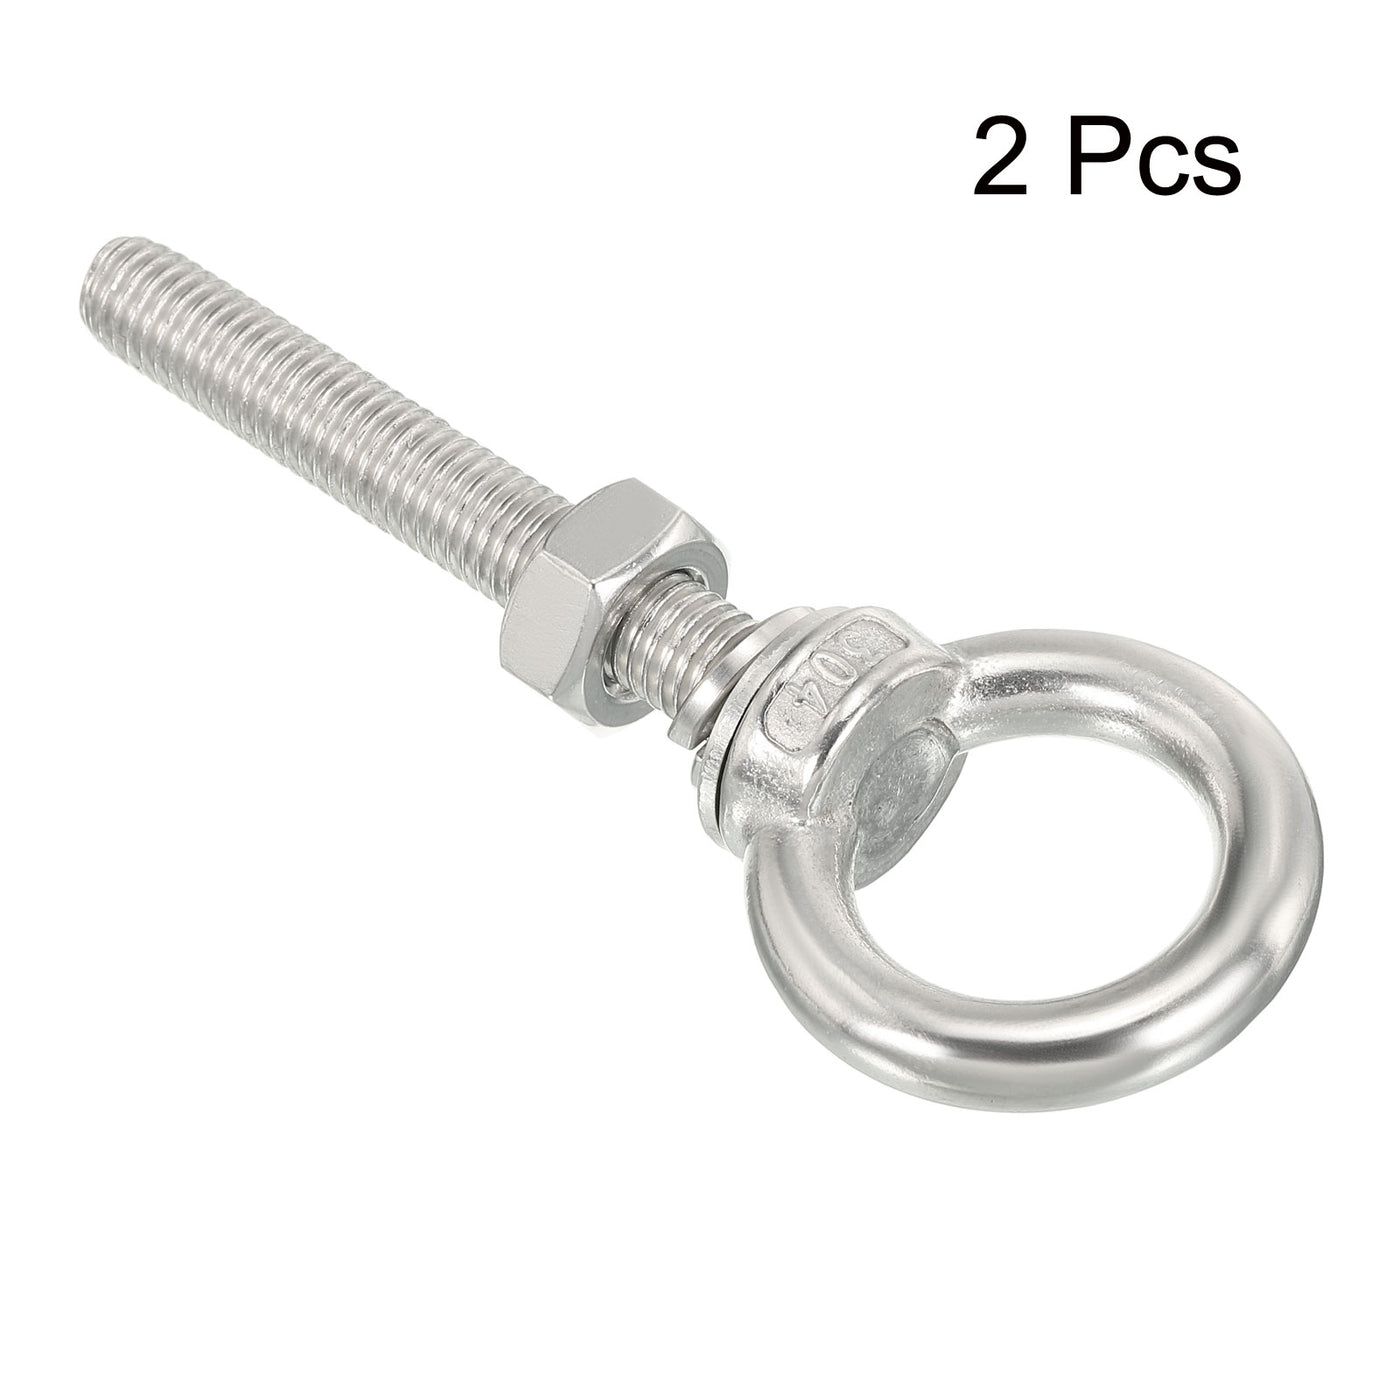 uxcell Uxcell M10x70 3/8"x2.75" Stainless Steel Eye Bolts Threaded Screw Eyebolt Shoulder Ring with Nuts Washers for Lifting Hanging, 2 Set